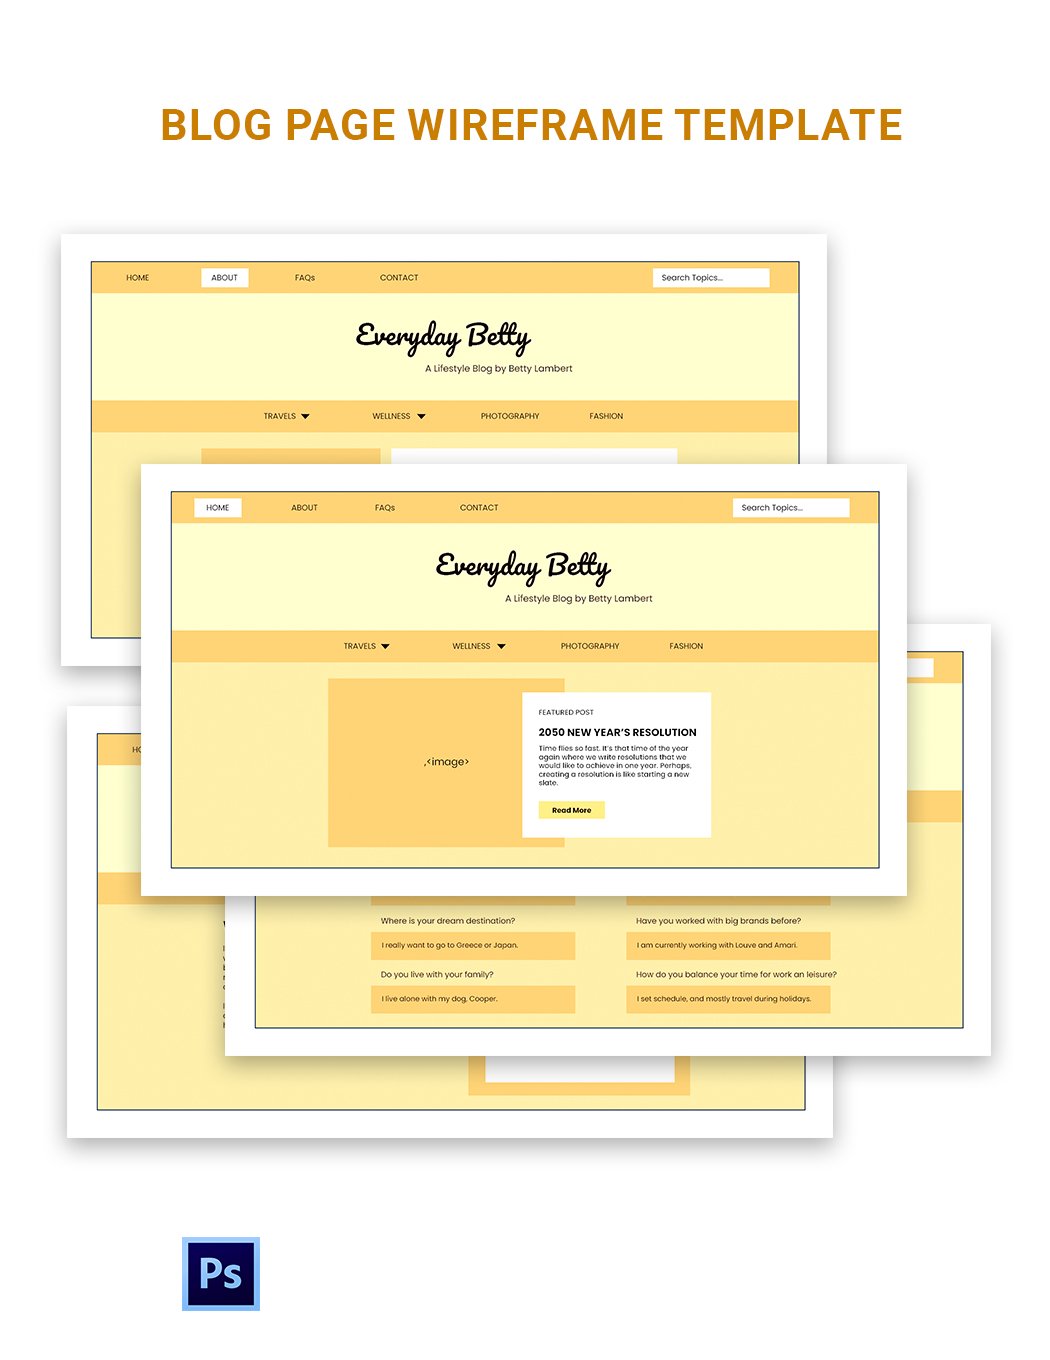 Blog Page Wireframe Template